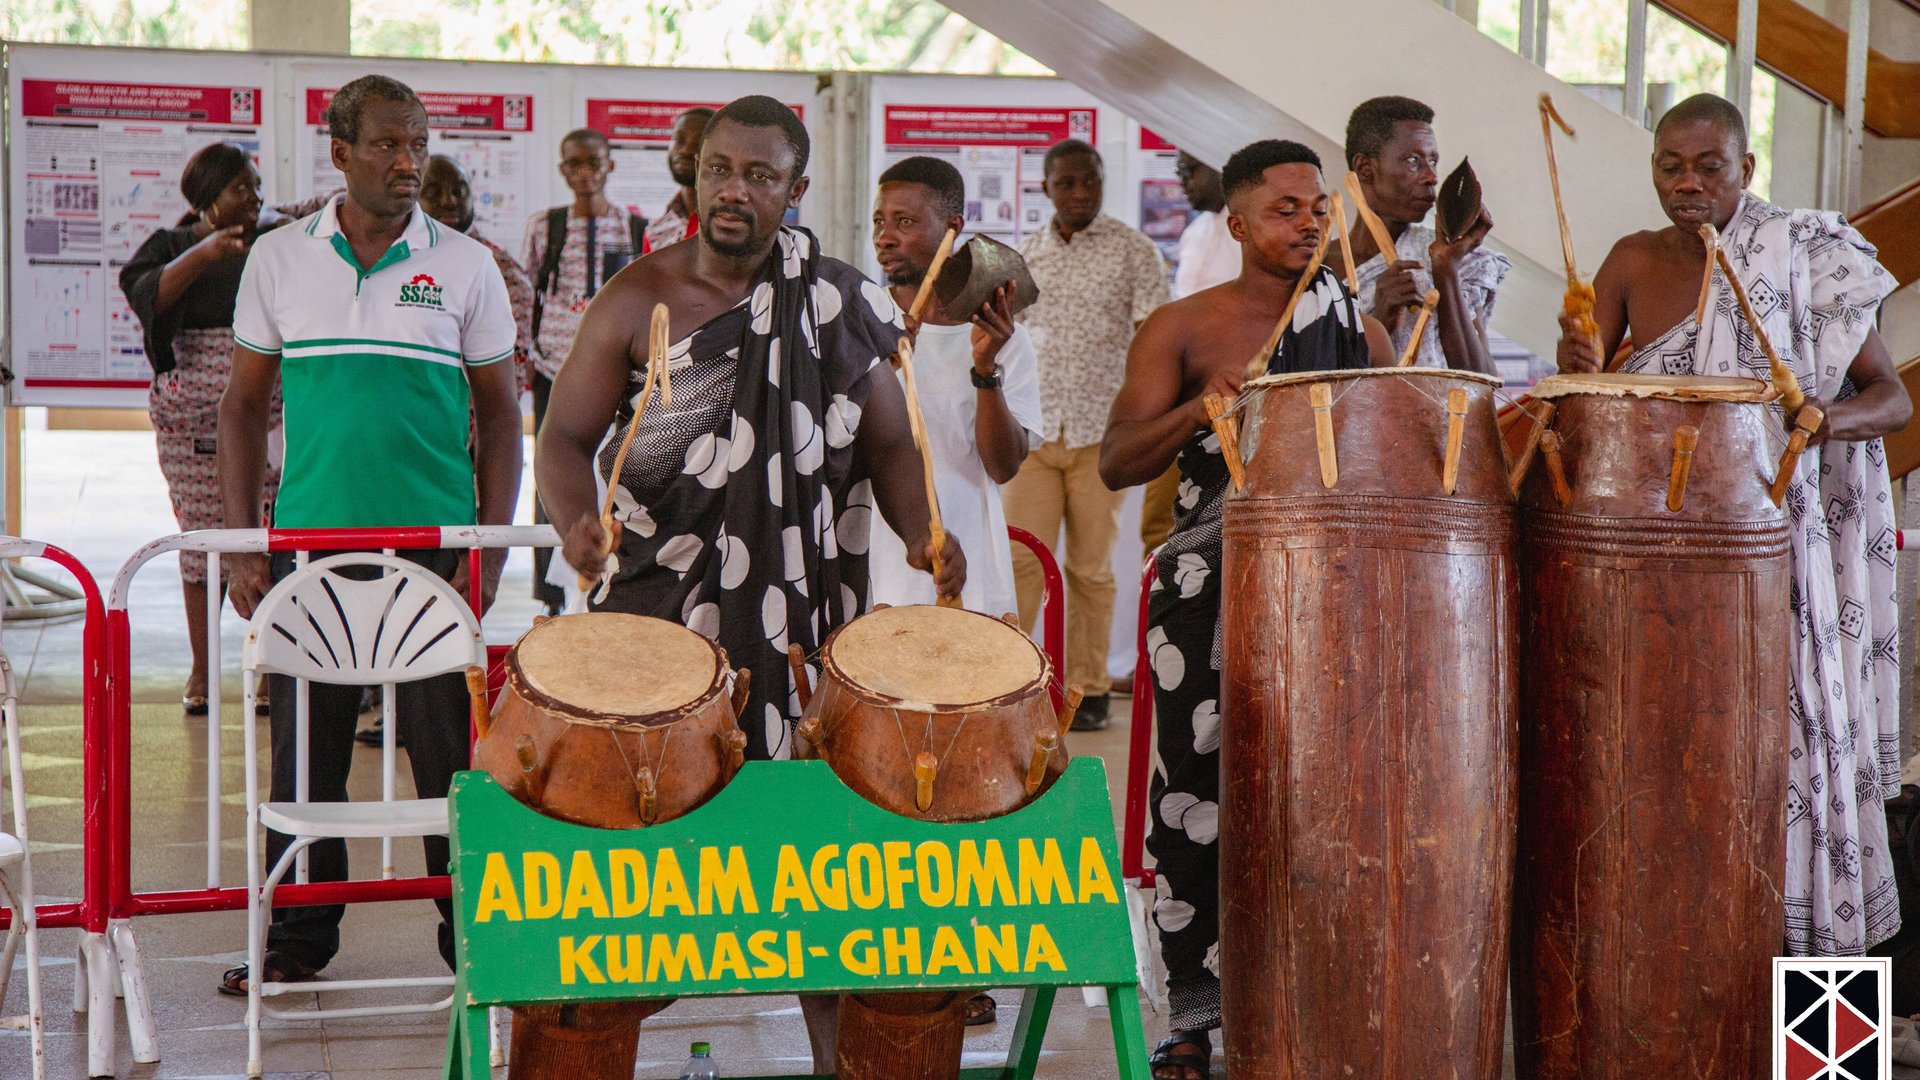 The photo shows a traditional Ghanaian drum group announcing the arrival of the King.